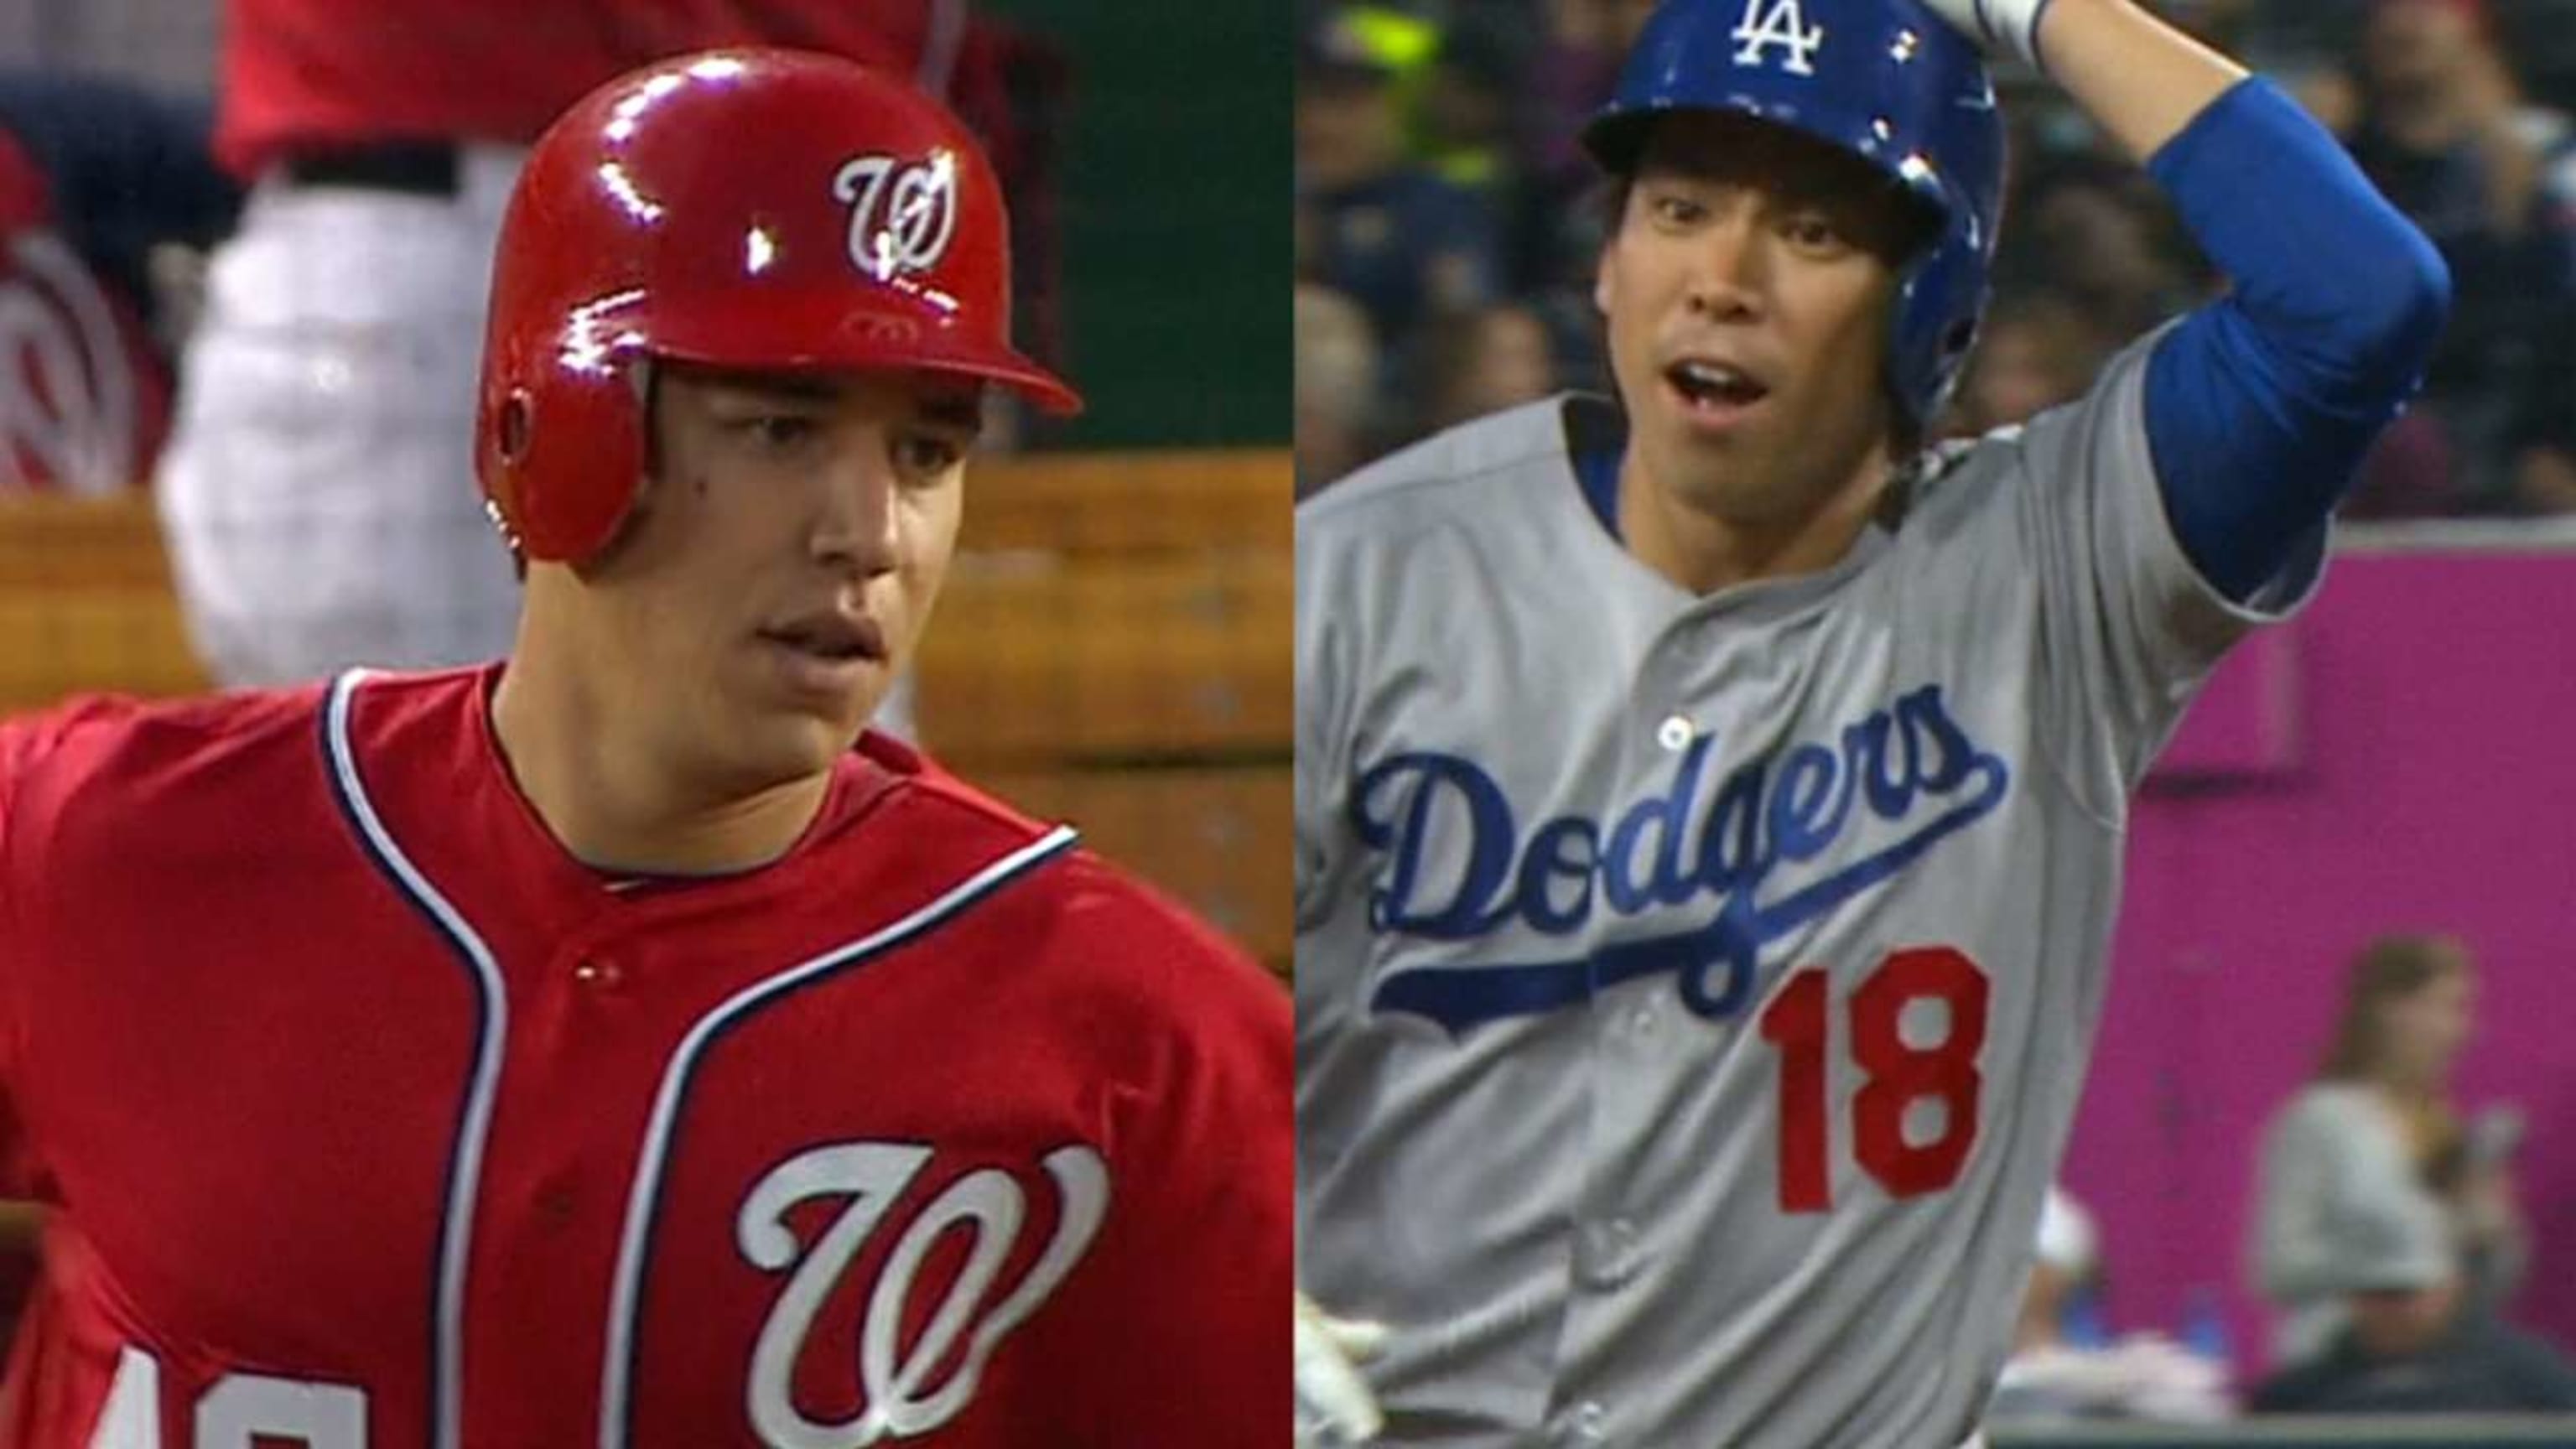 Kenta Maeda roughed up as Dodgers are swept for first time this